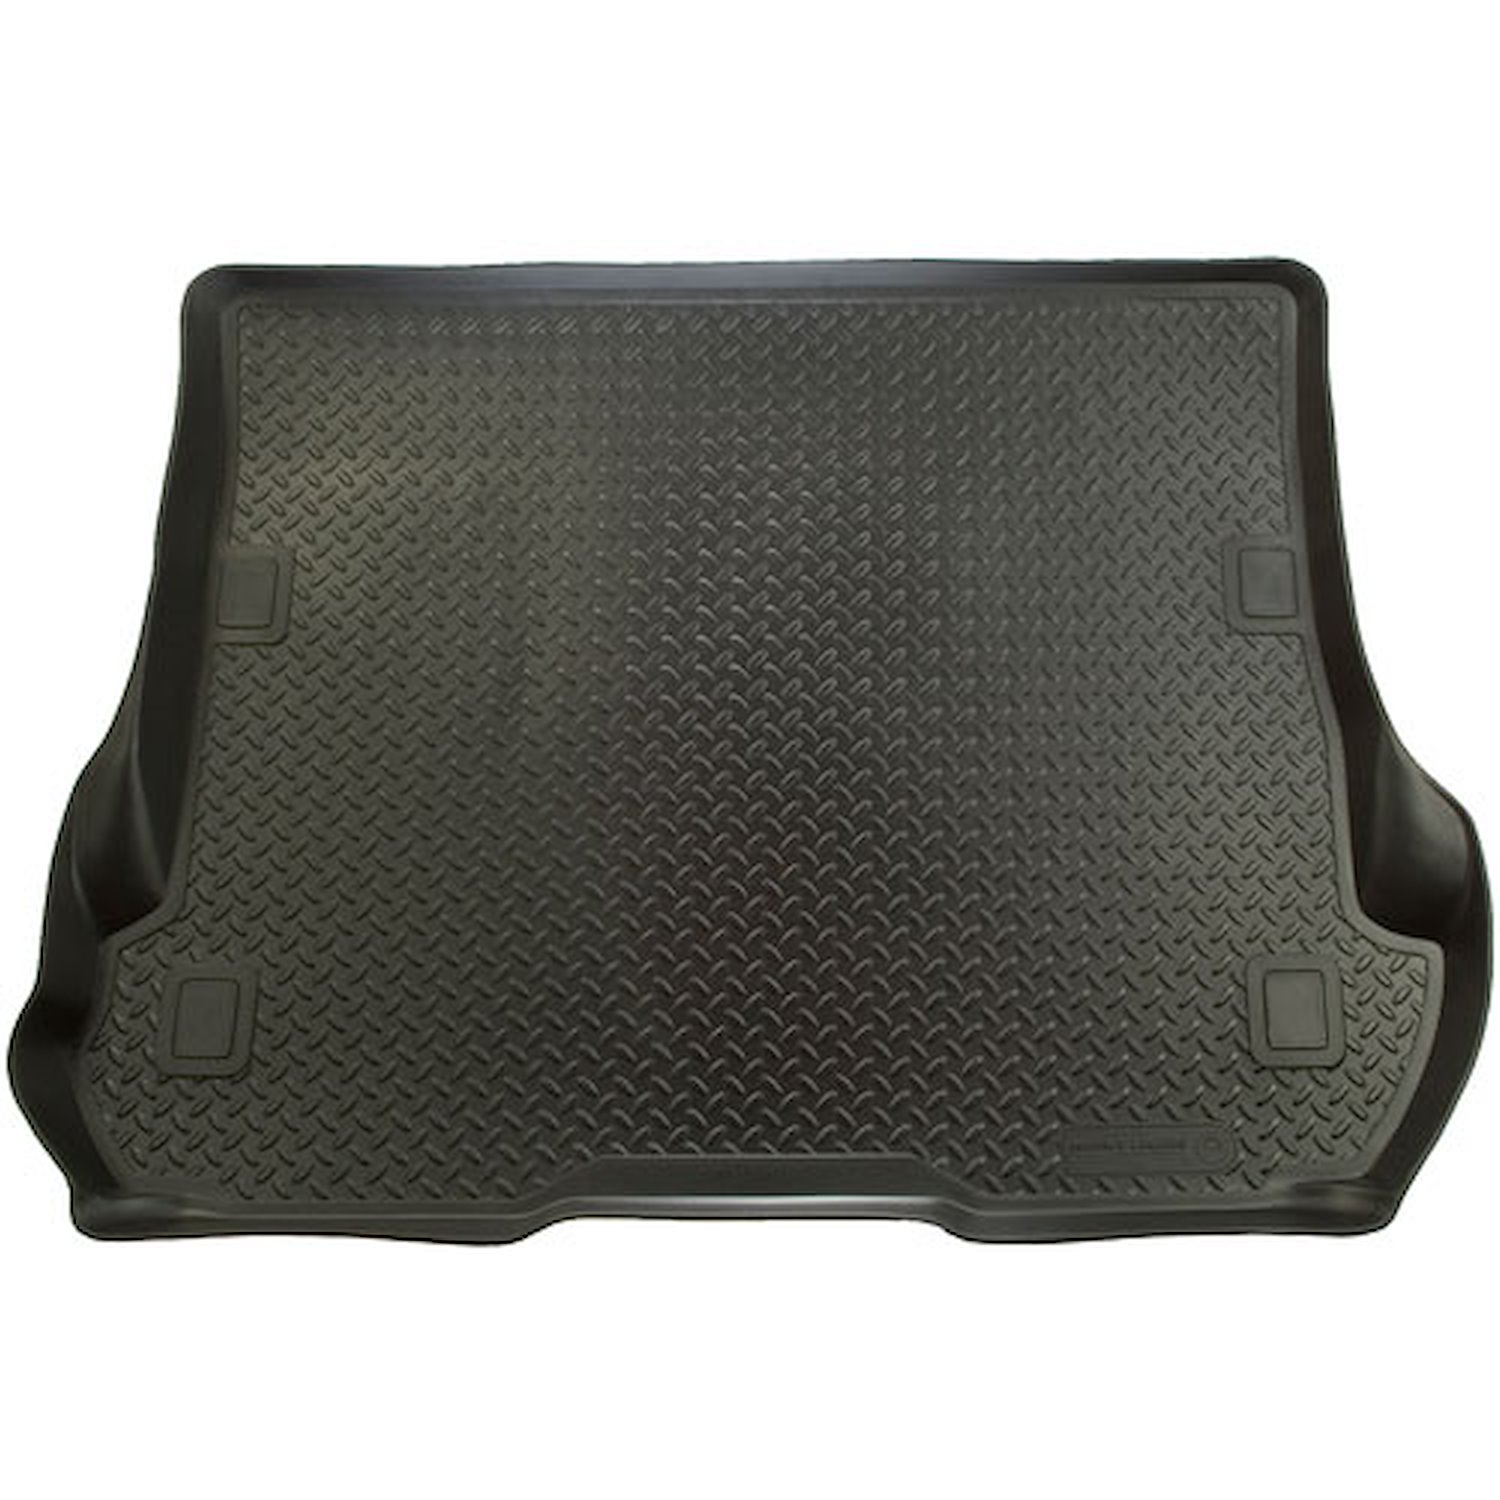 Classic Style Cargo Area Liner 2005-2015 for Nissan Xterra